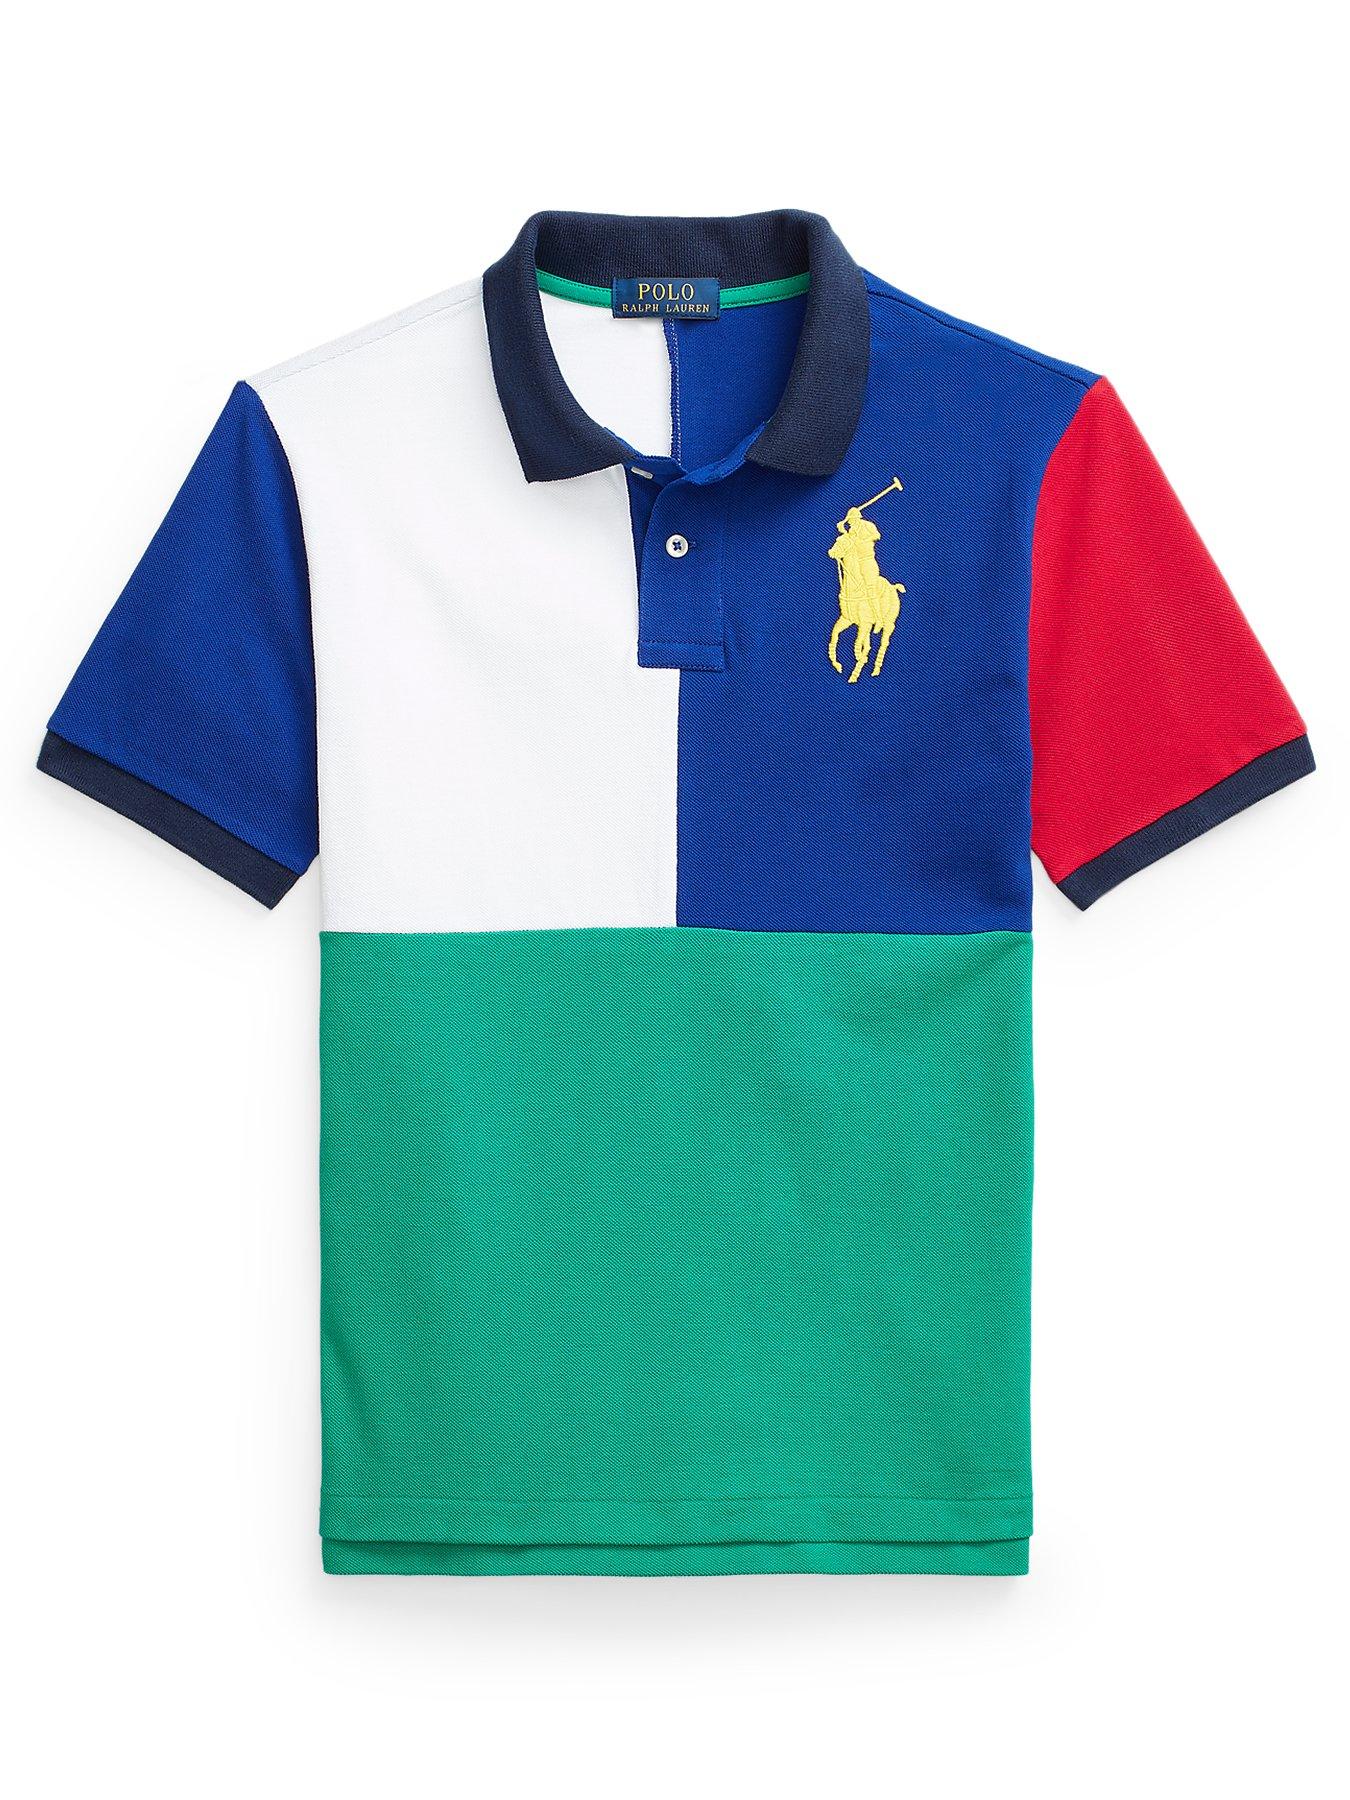 polo shirts number 3